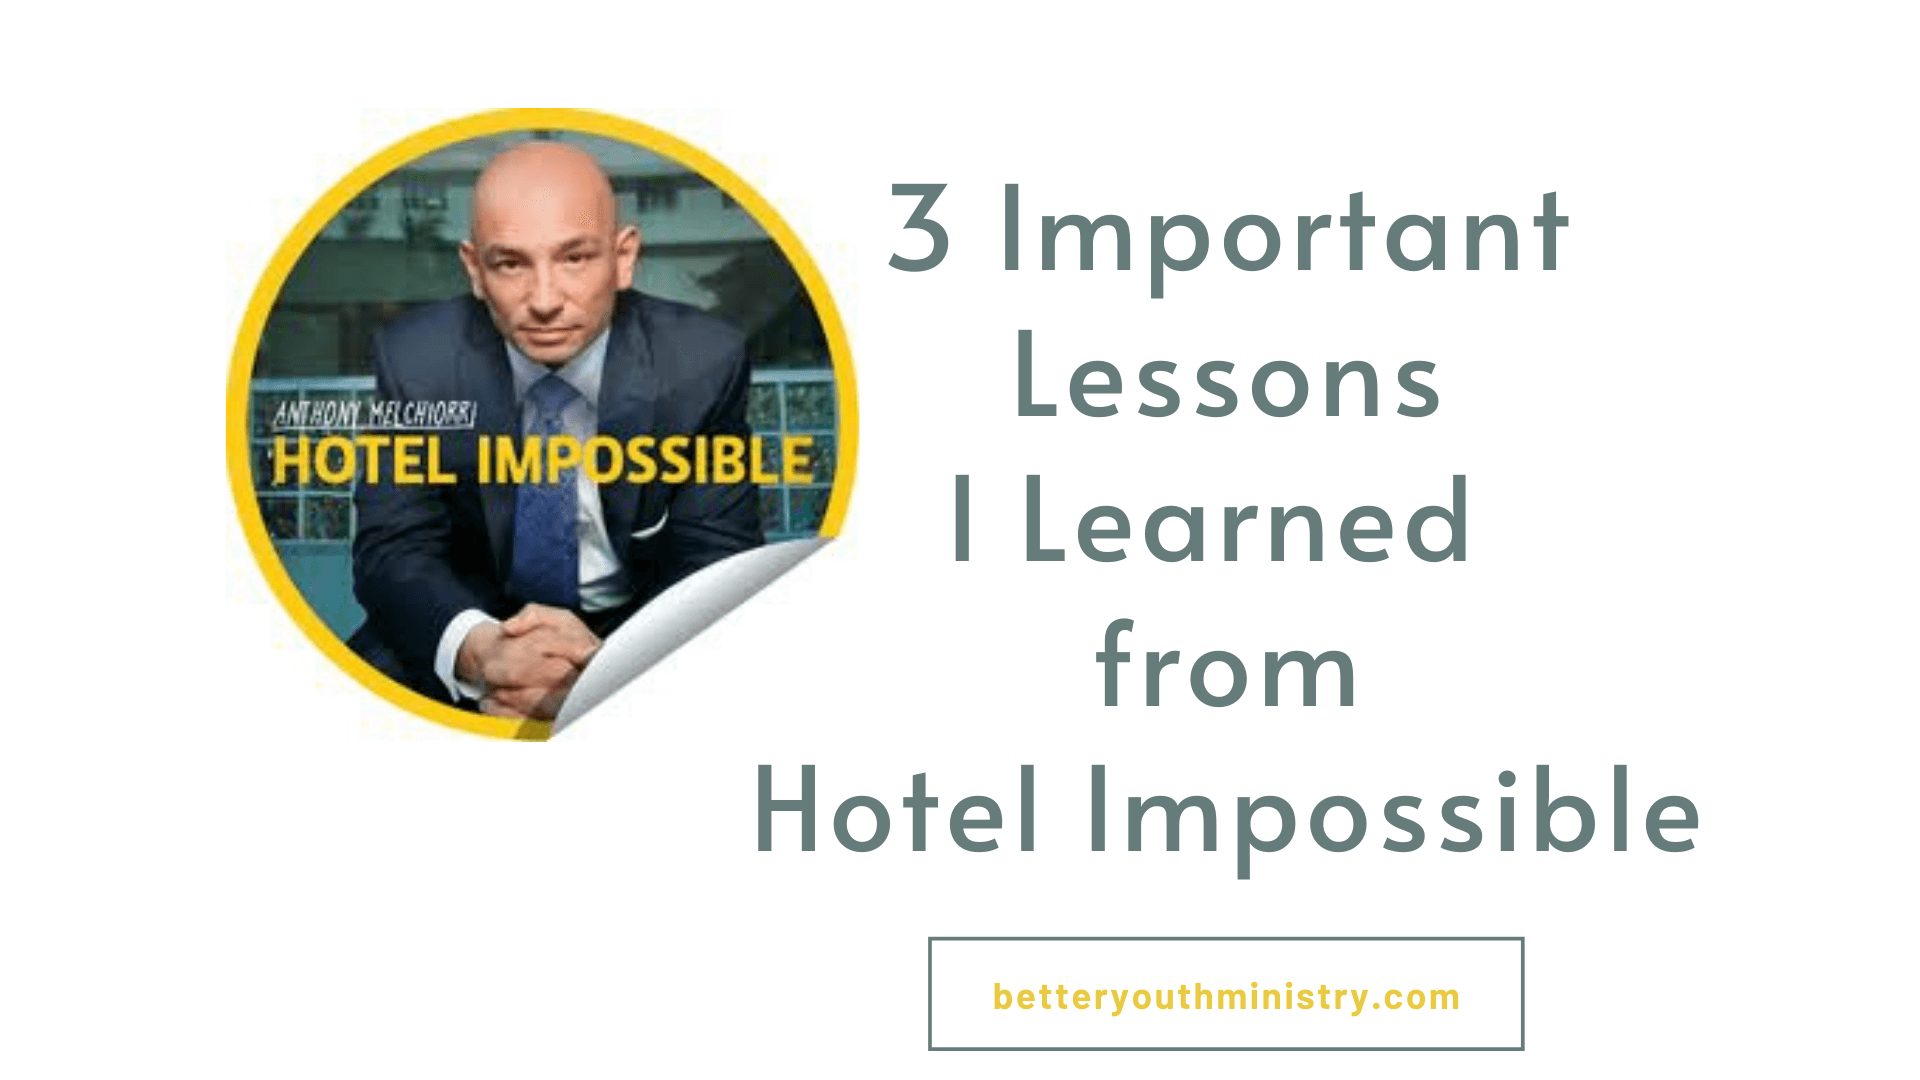 3 Important Lessons I Learned from Hotel Impossible